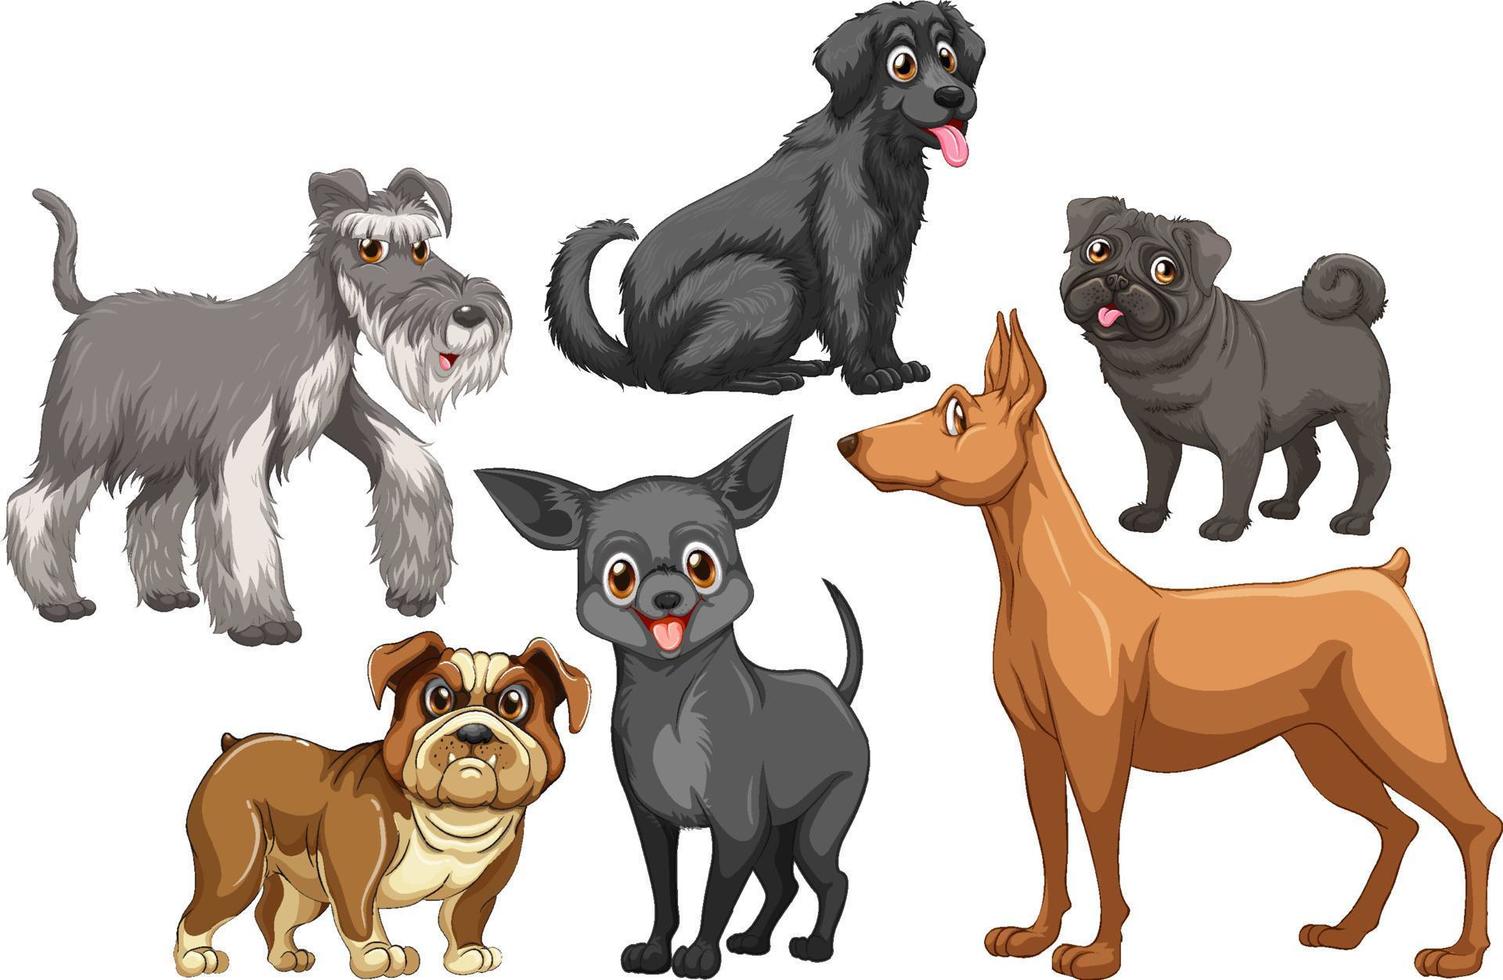 Set of different cute dogs in cartoon style vector